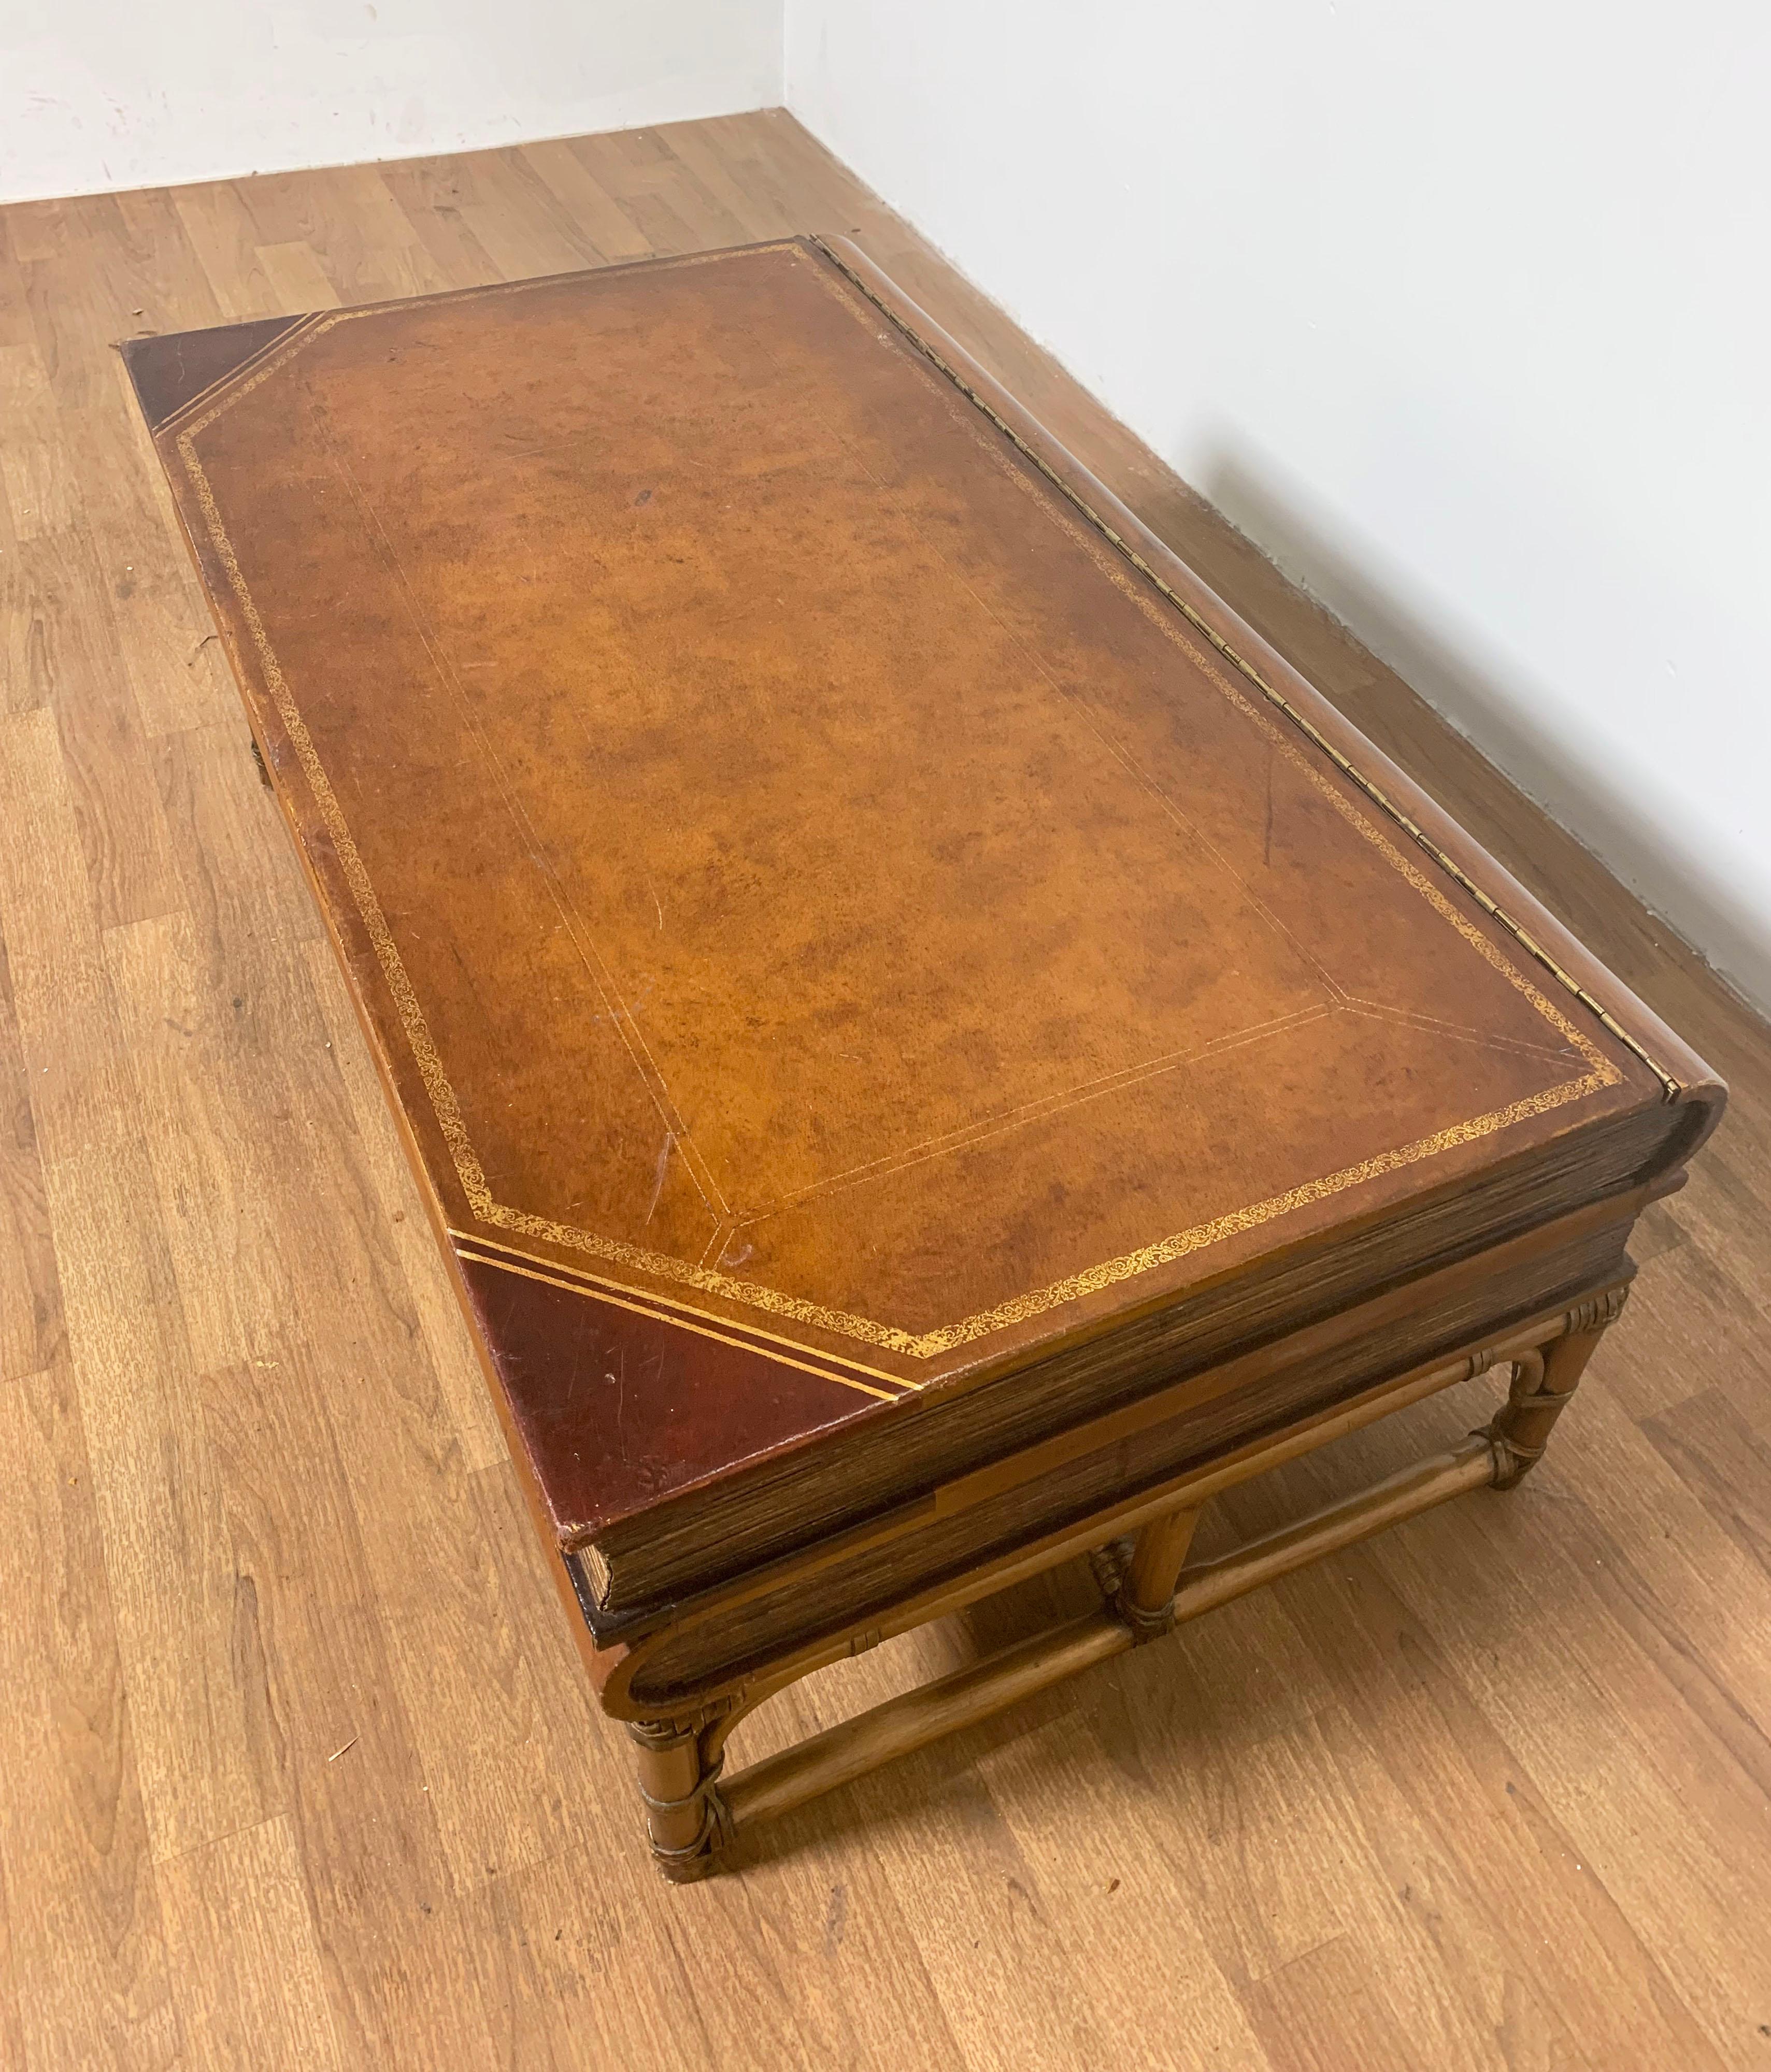 Bibliophile's coffee table, ca. 1950s and made in Italy for Neiman-Marcus, in the form of leather bound antiquarian stacked books, includes interior storage. On a rattan wrapped bamboo stand.